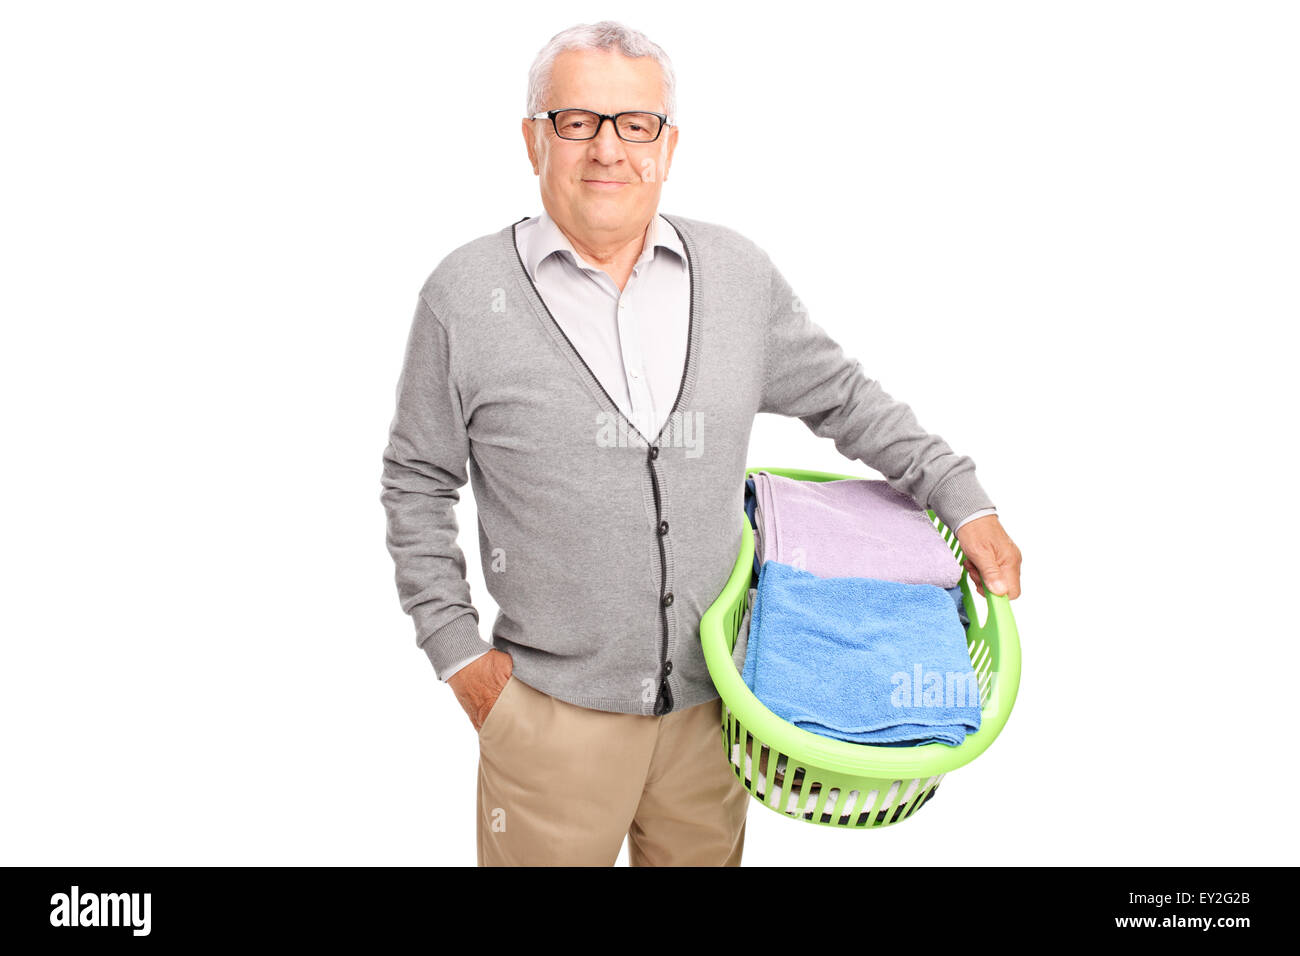 Cheerful senior man holding a laundry basket and looking at the camera isolated on white background Stock Photo